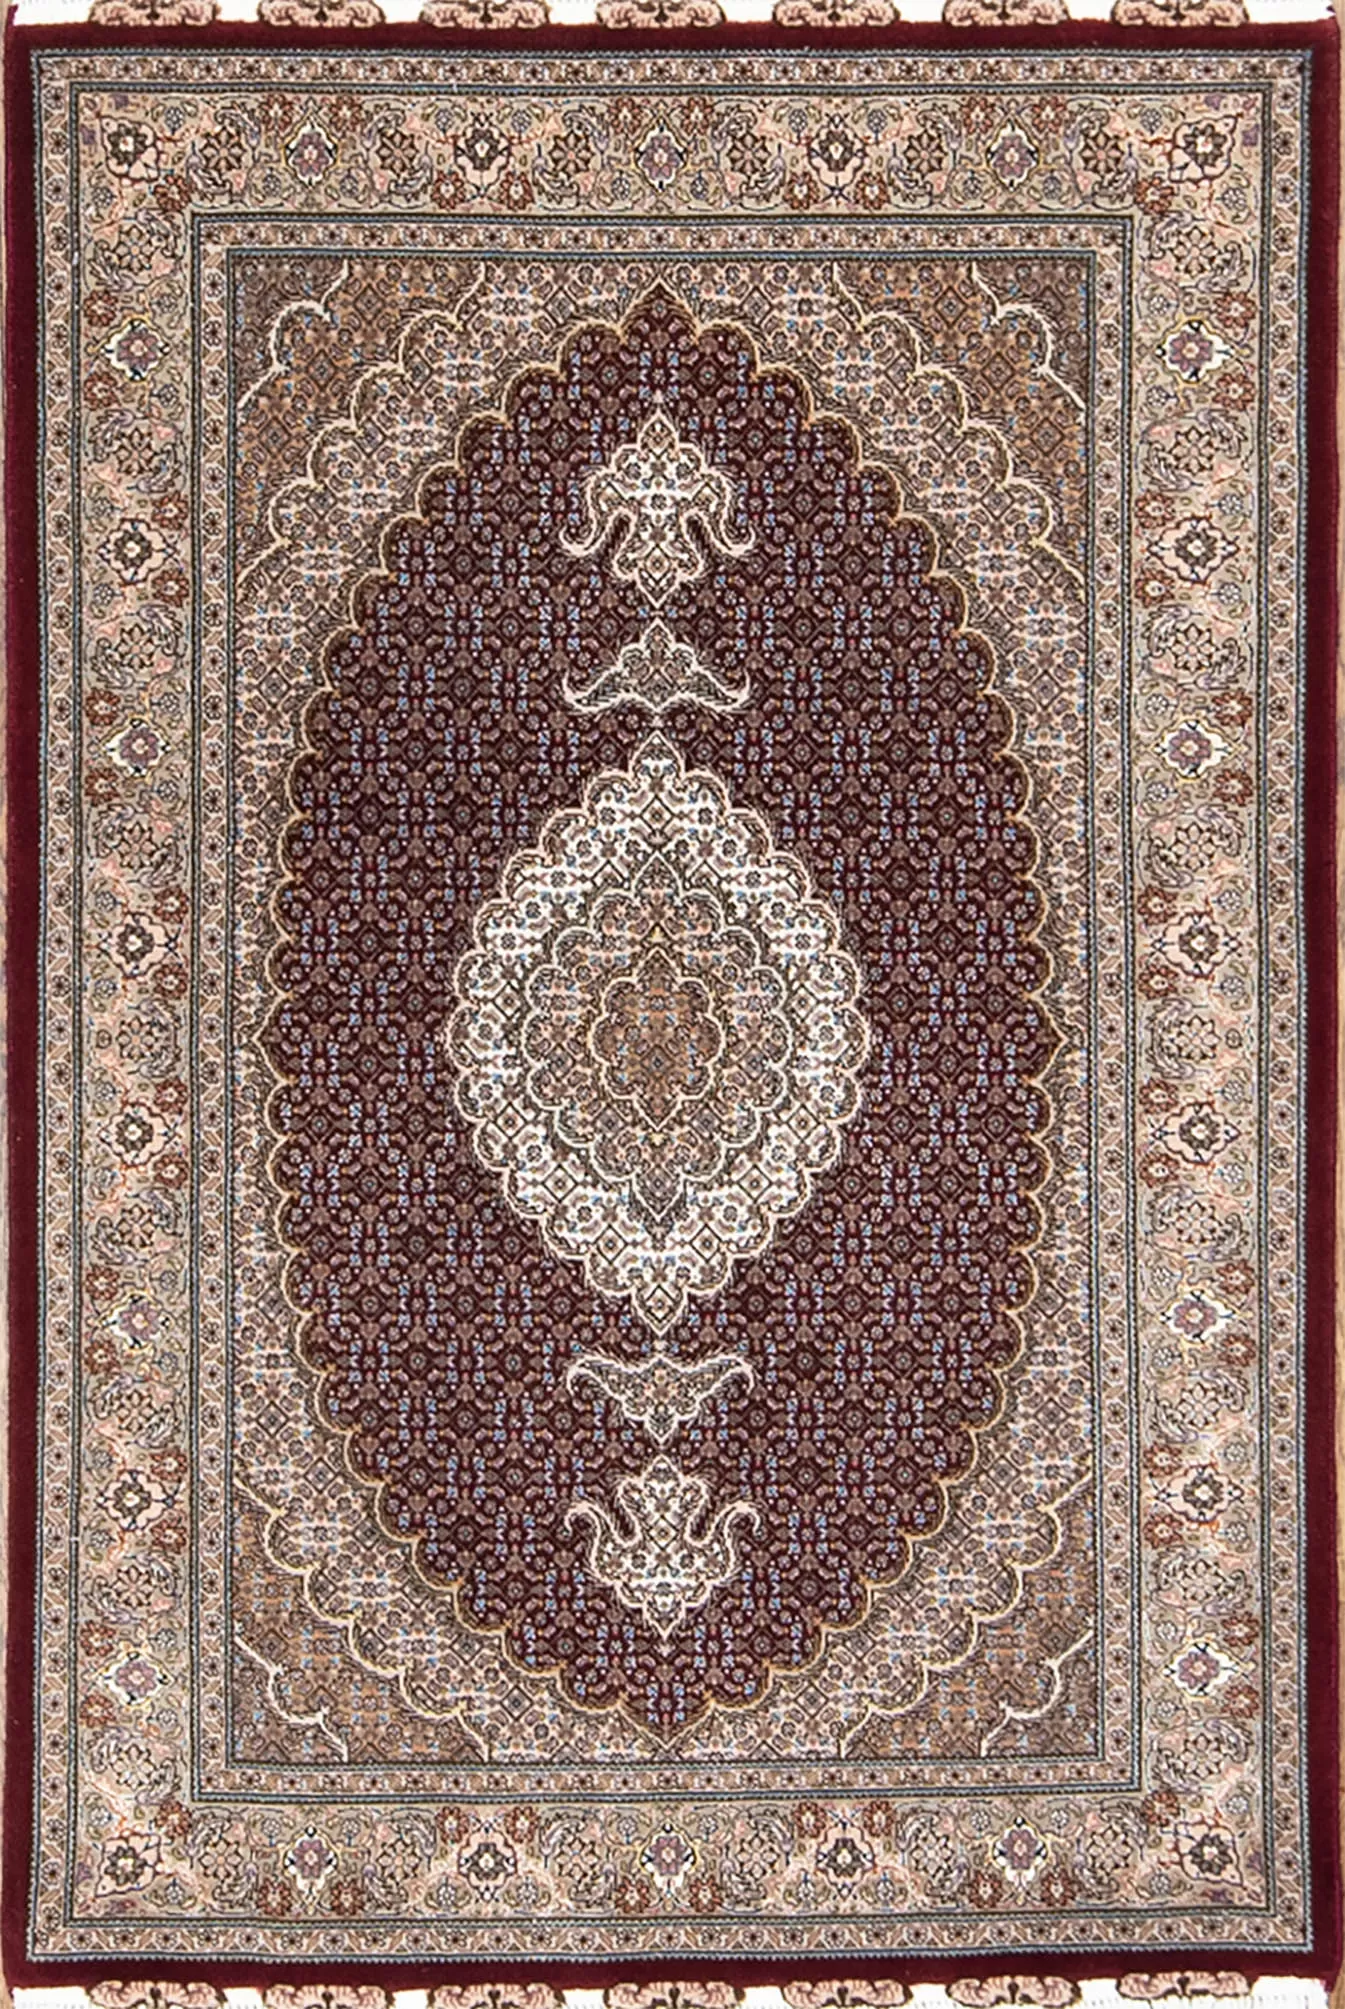 Small throw rug , handmade Persian Tabriz wool and silk rug in red color. Size 3.4x5.5.